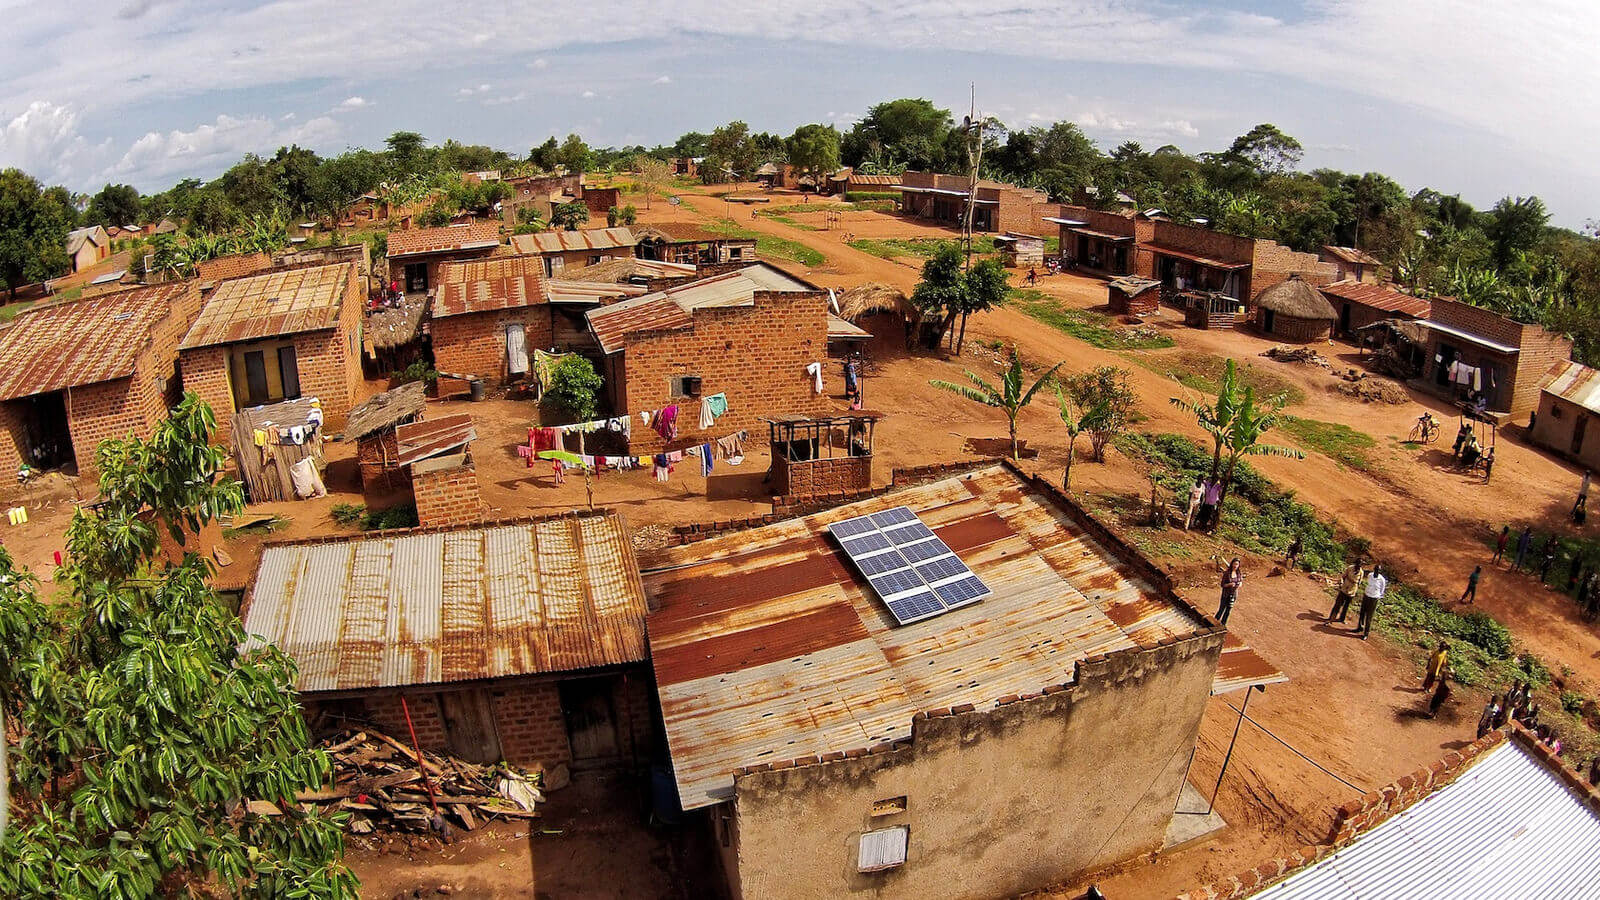 Solar panel on the roof of a house in Uganda